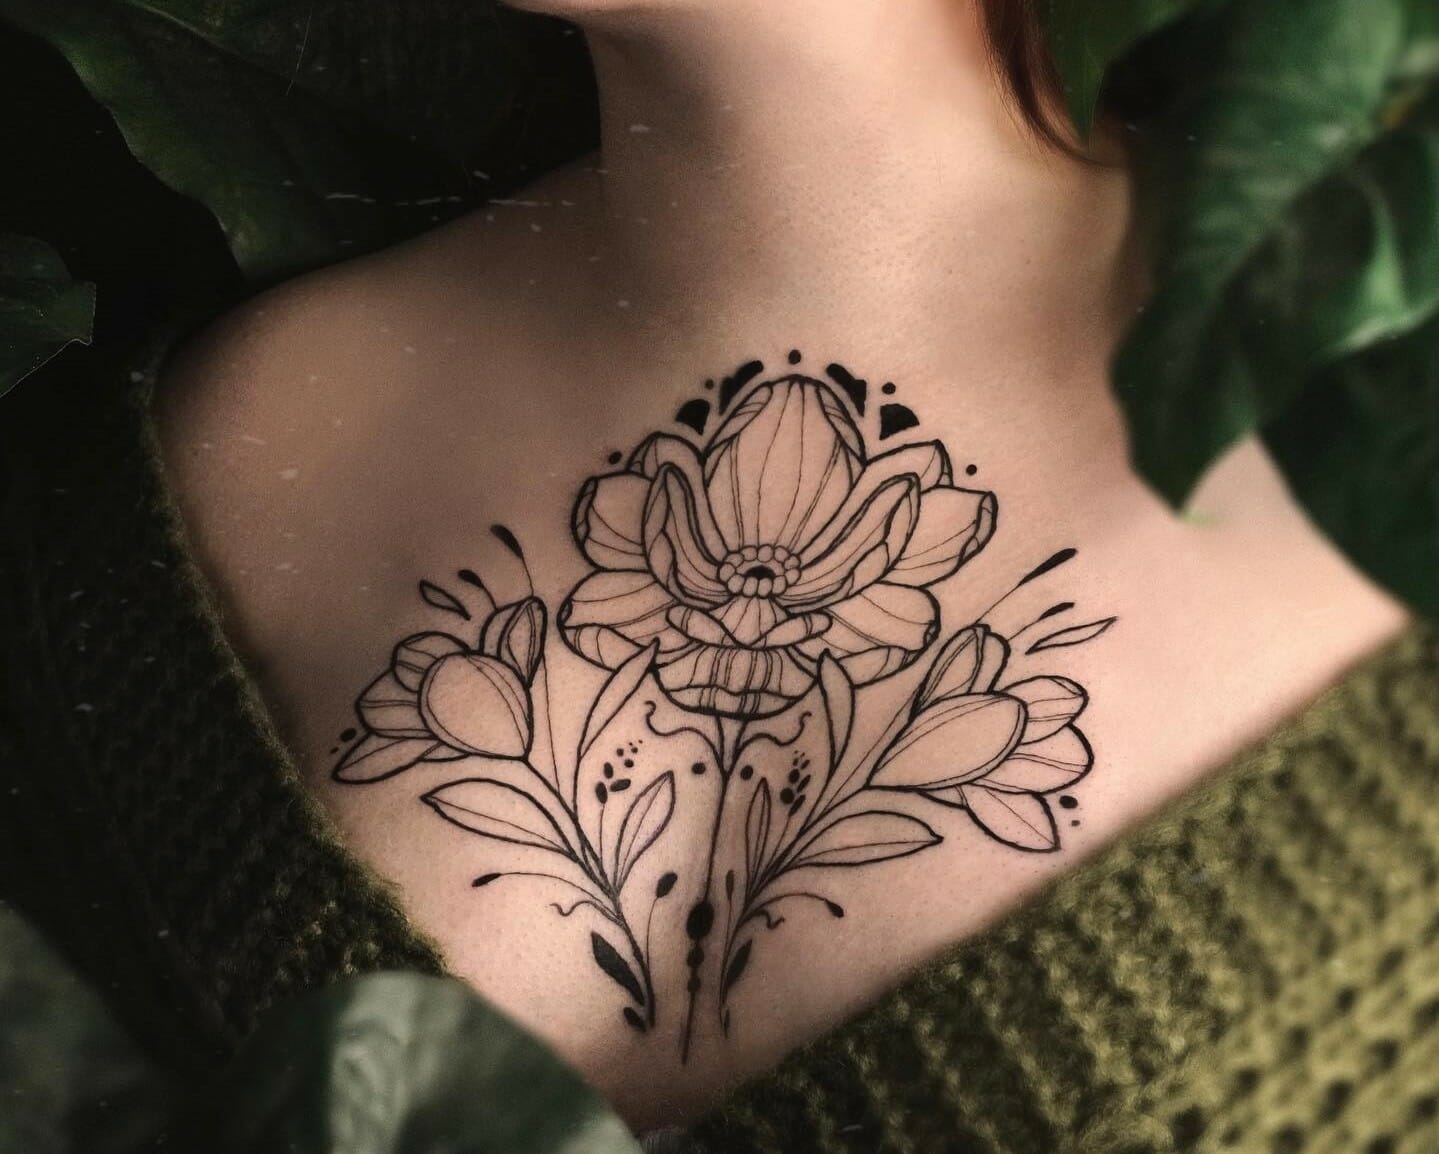 10 Best Symmetrical Tattoo Ideas That Will Blow Your Mind!

+2023